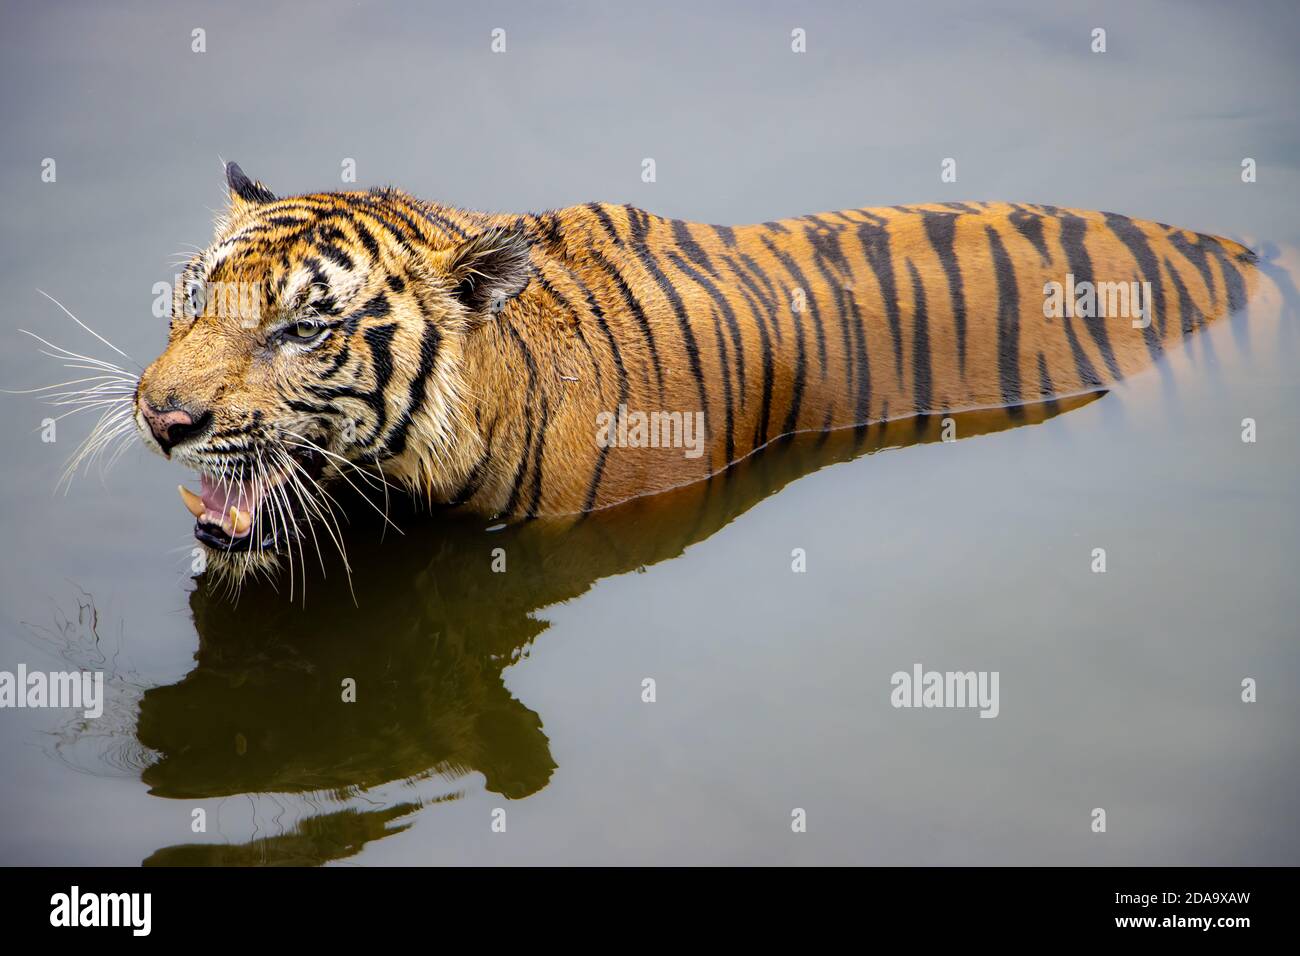 The roaring tiger stands in the water. A tiger stands in the water with his a reflection on a calm surface. Stock Photo